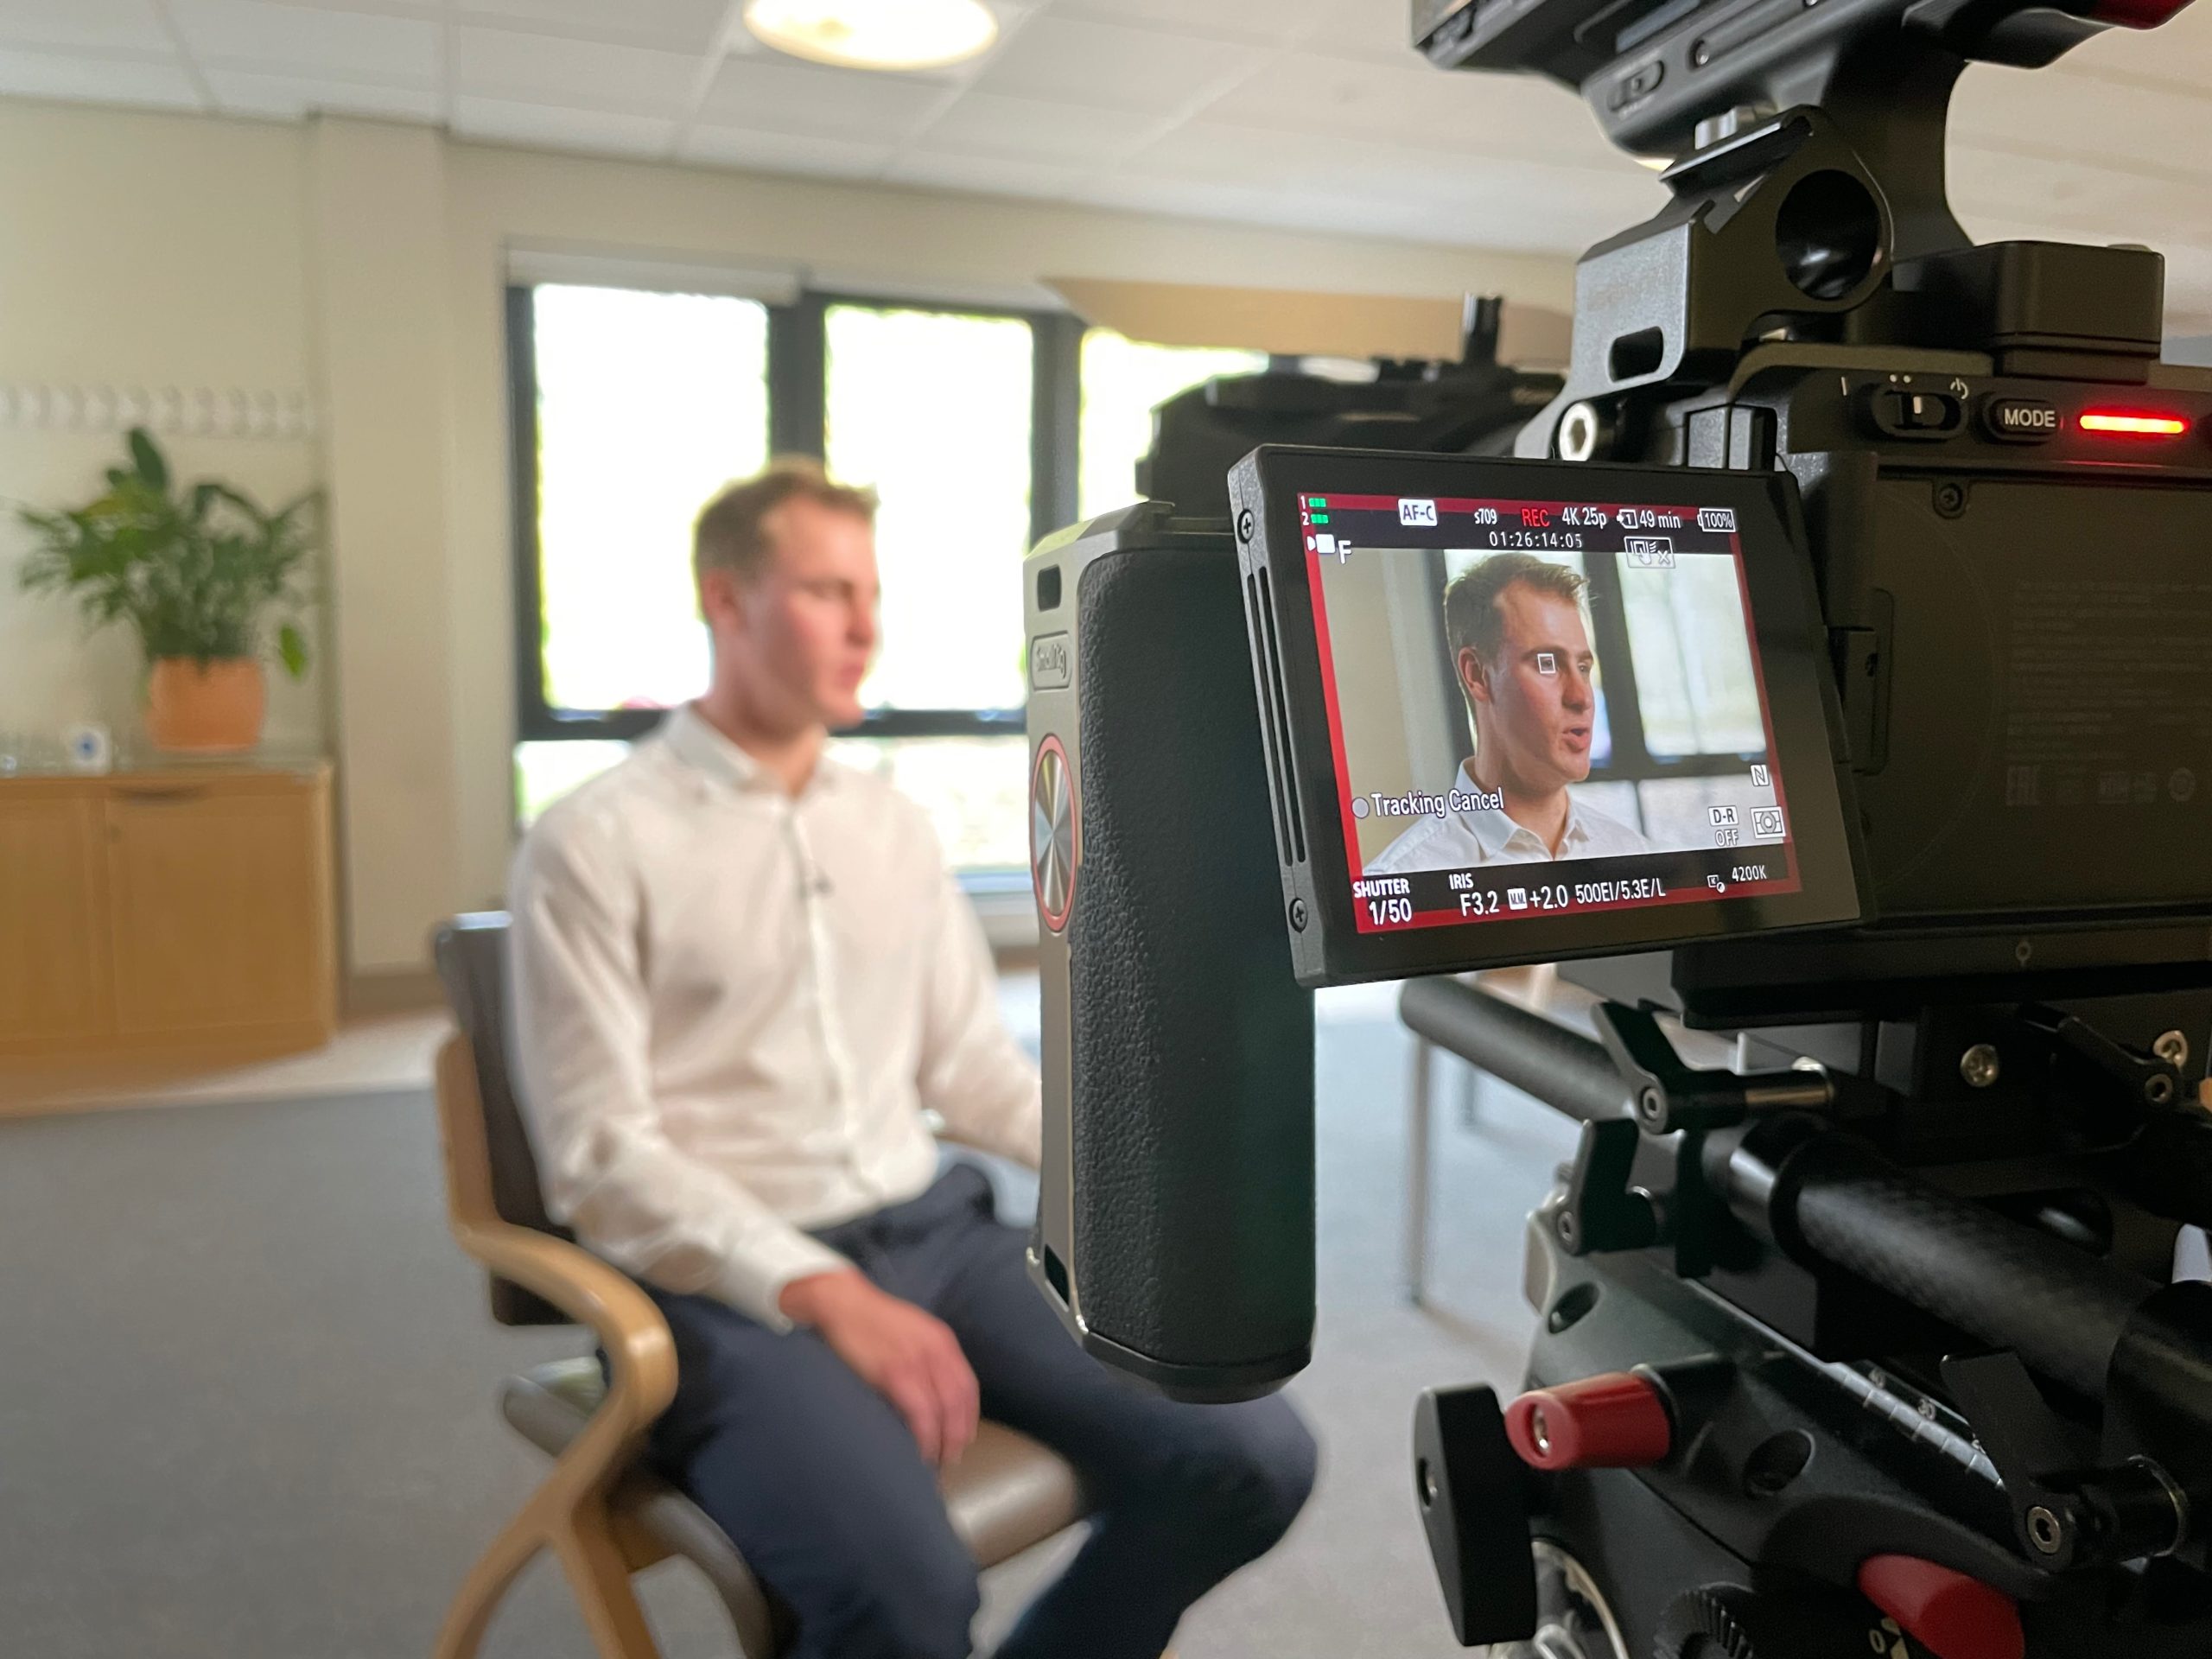 Photo of an interview being filmed showing the interviewee in the frame on the camera display